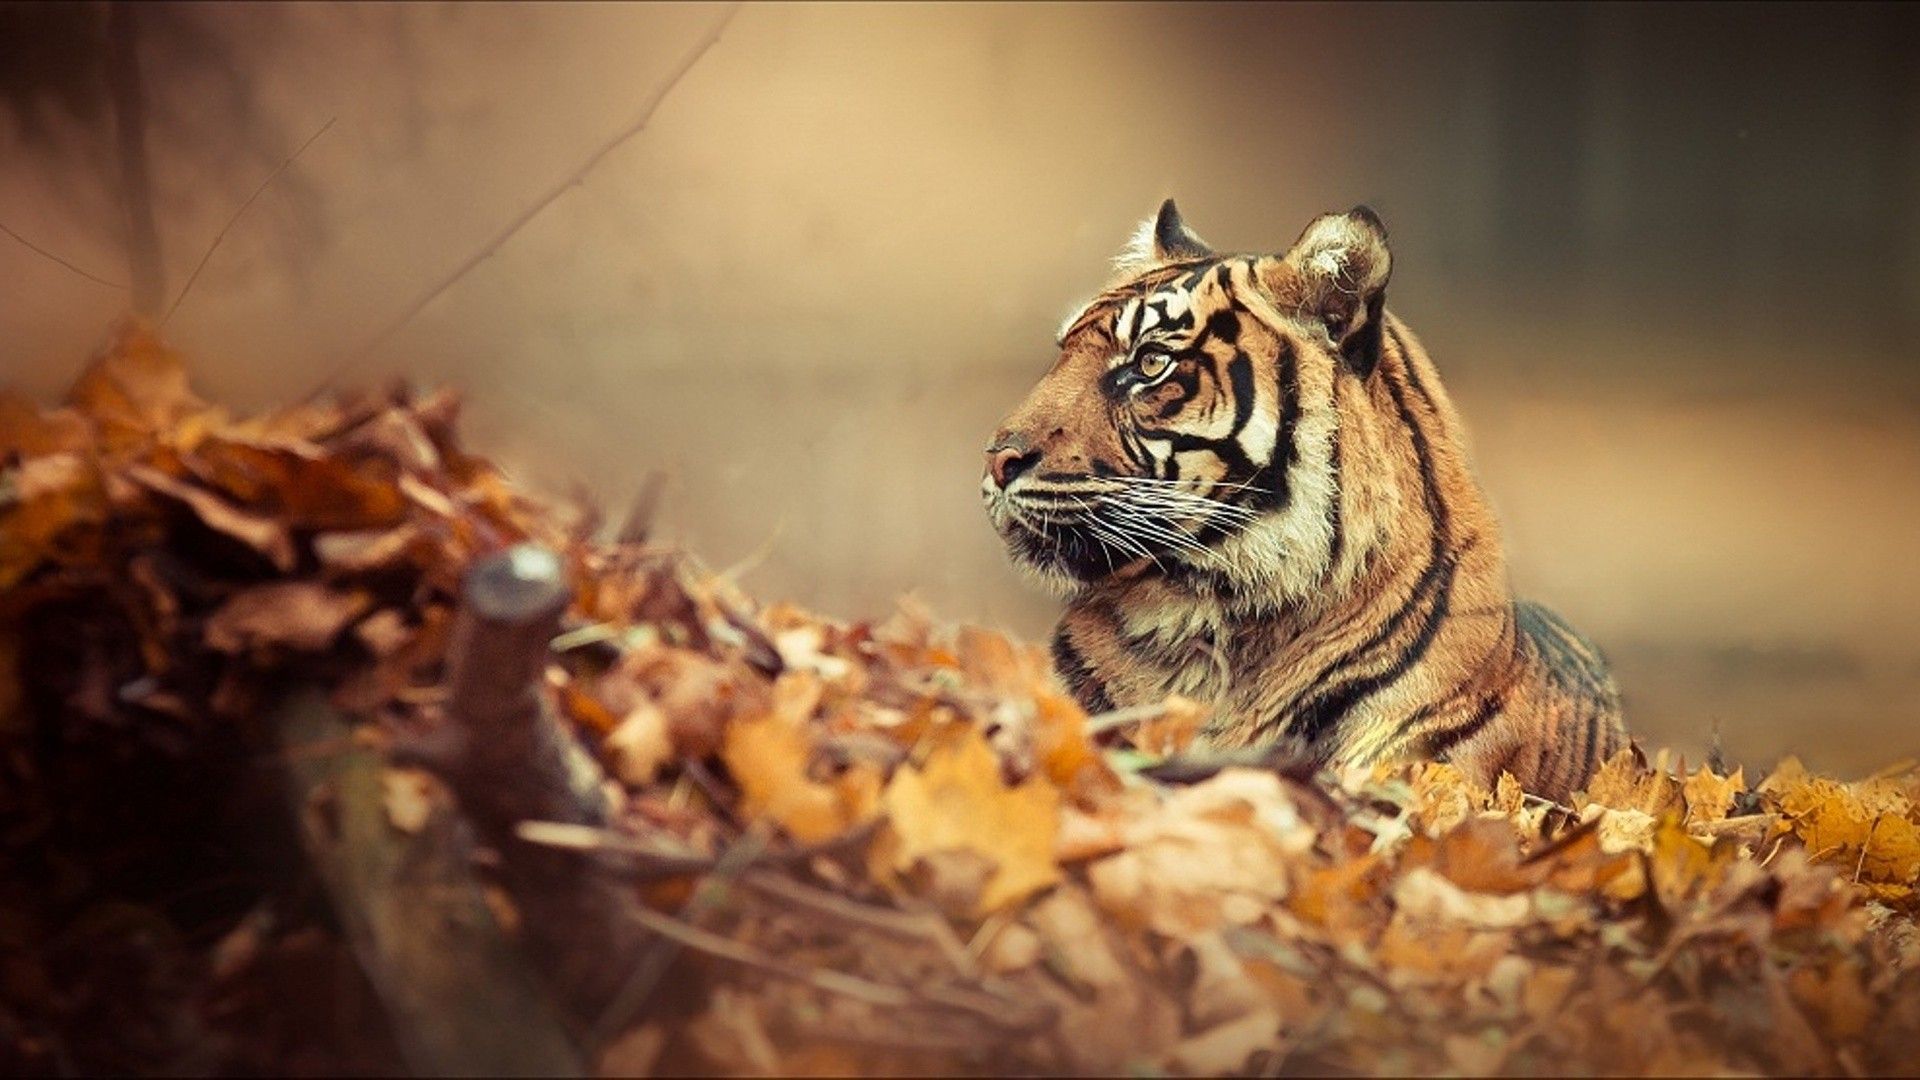 Tiger-HD-Wallpapers-for-Mobile.jpg